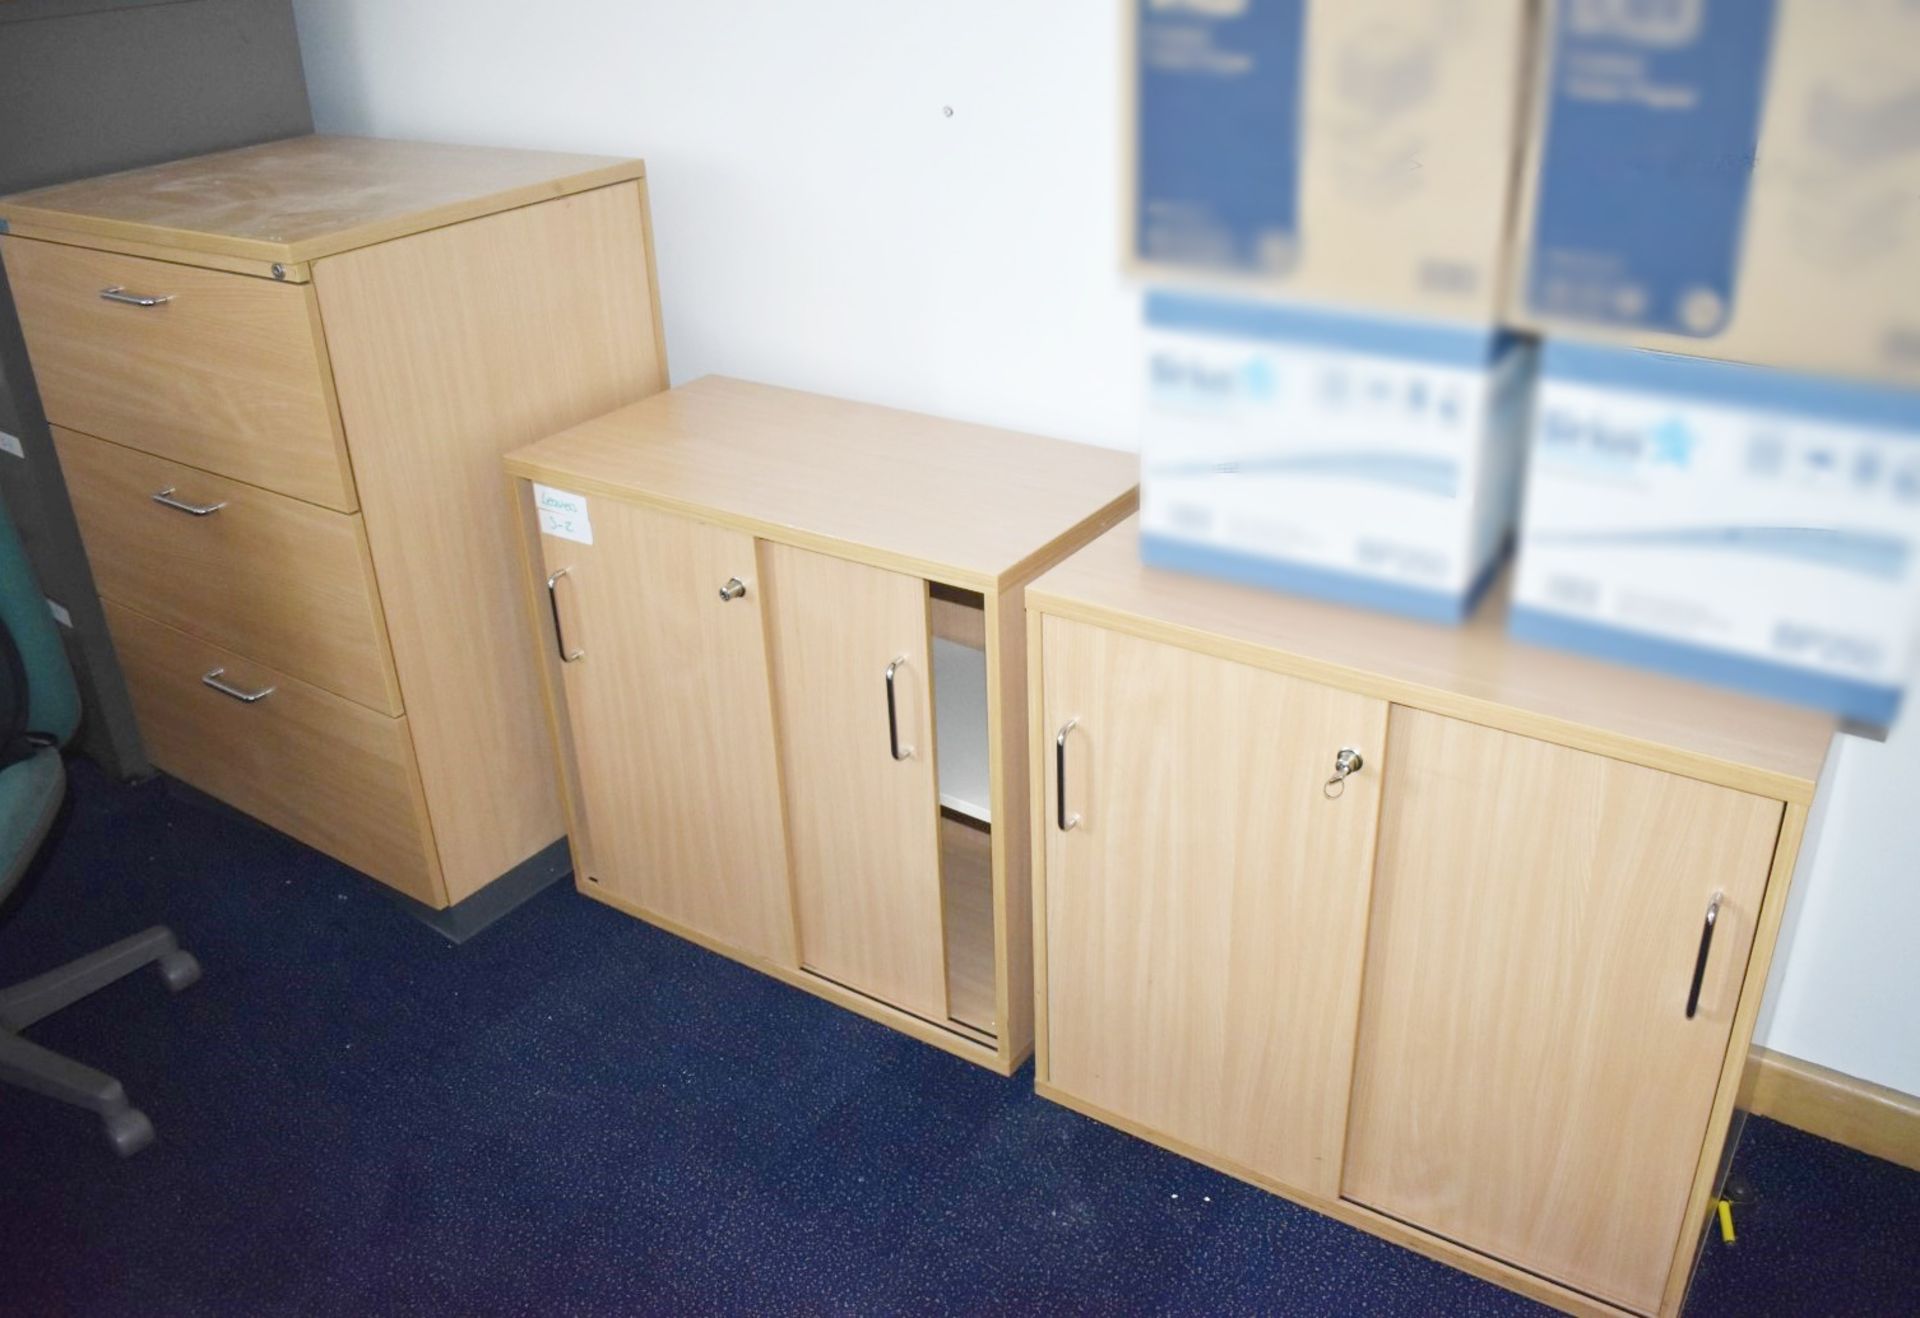 1 x Assorted Collection of Office Furniture - Includes 2 x 160cm Office Desks, 3 x Swivel Chairs, - Image 3 of 7